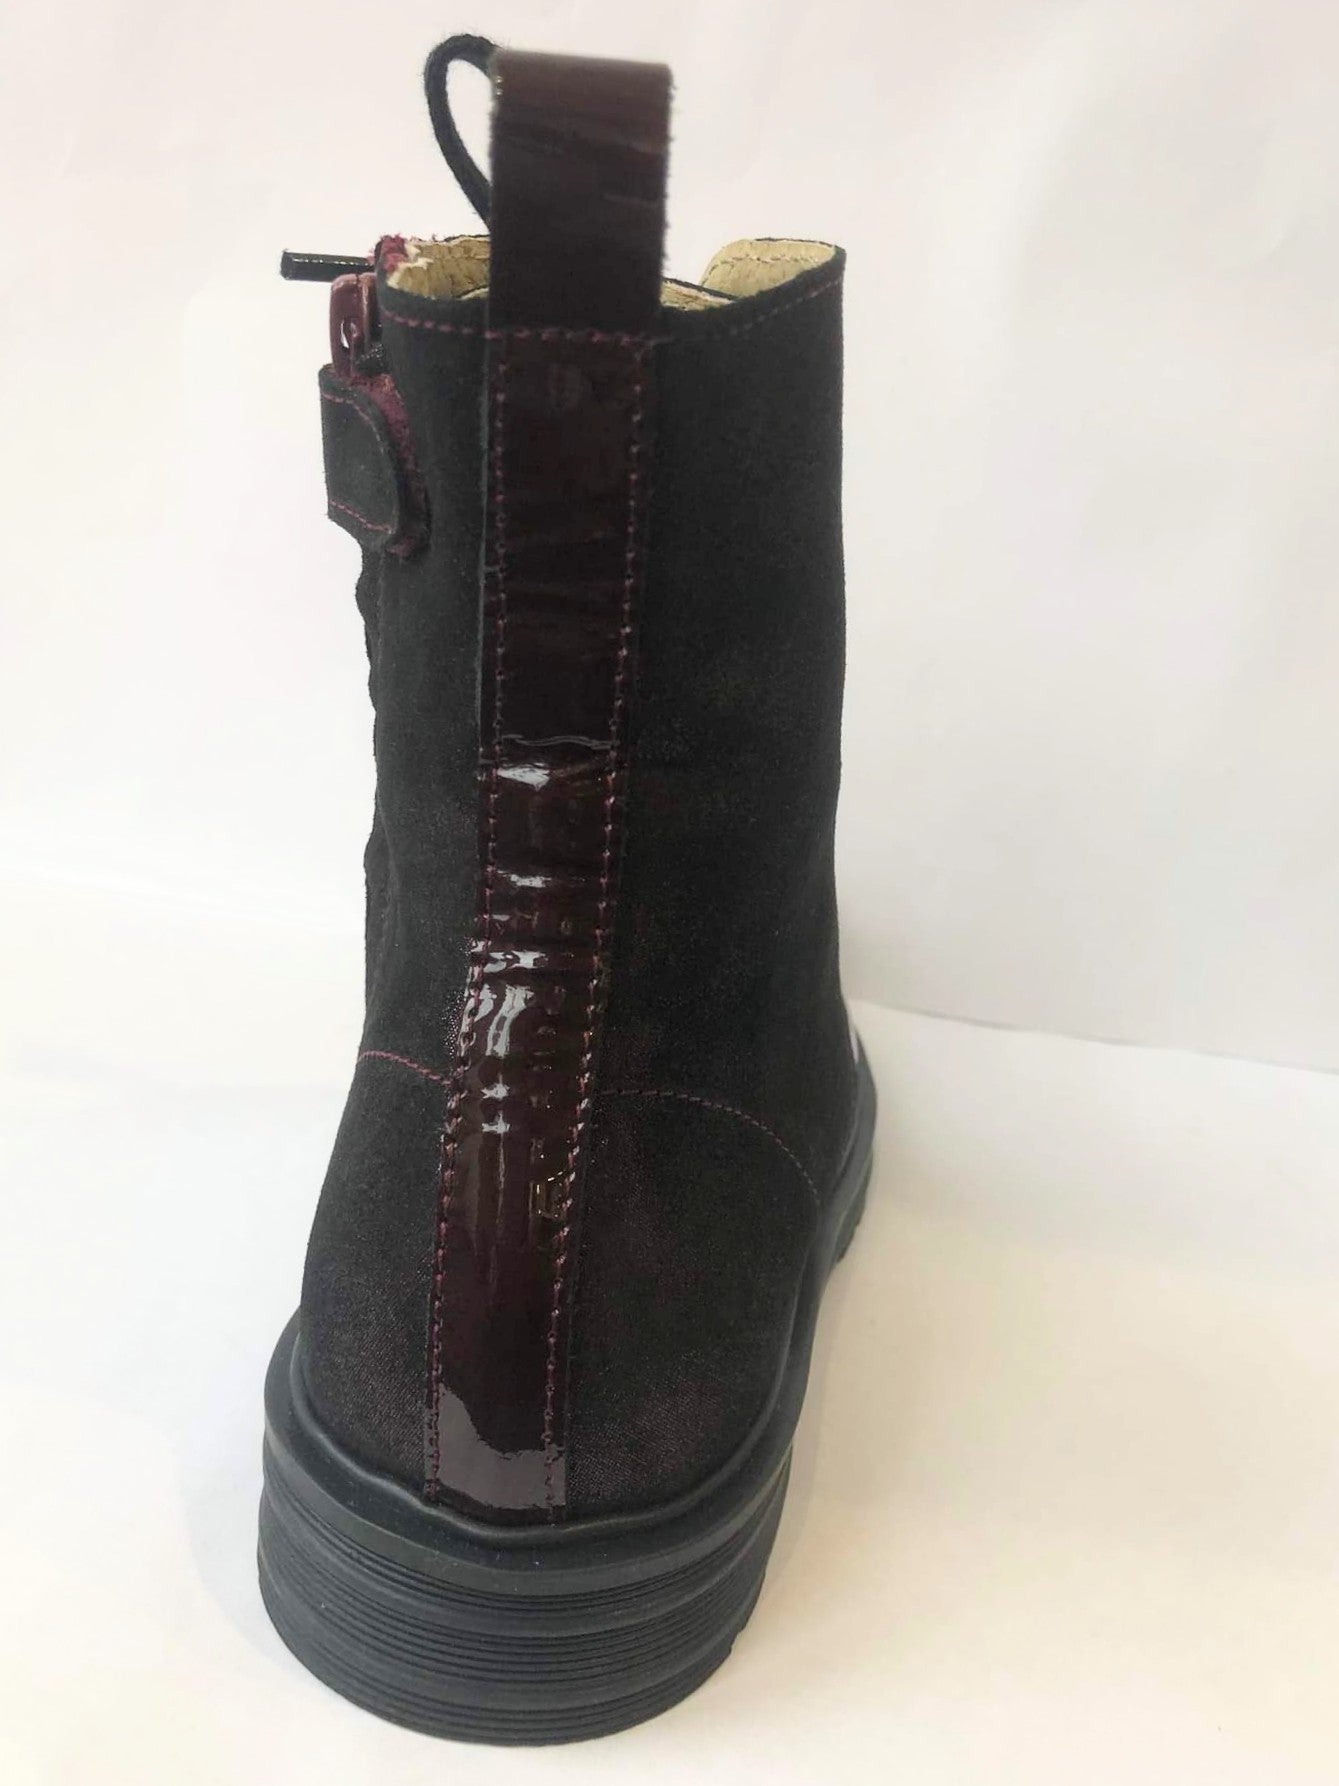 A girls boot by Petasil, style Clive 4, in burgundy patent/glitter leather with zip and lace fastening. Back view.